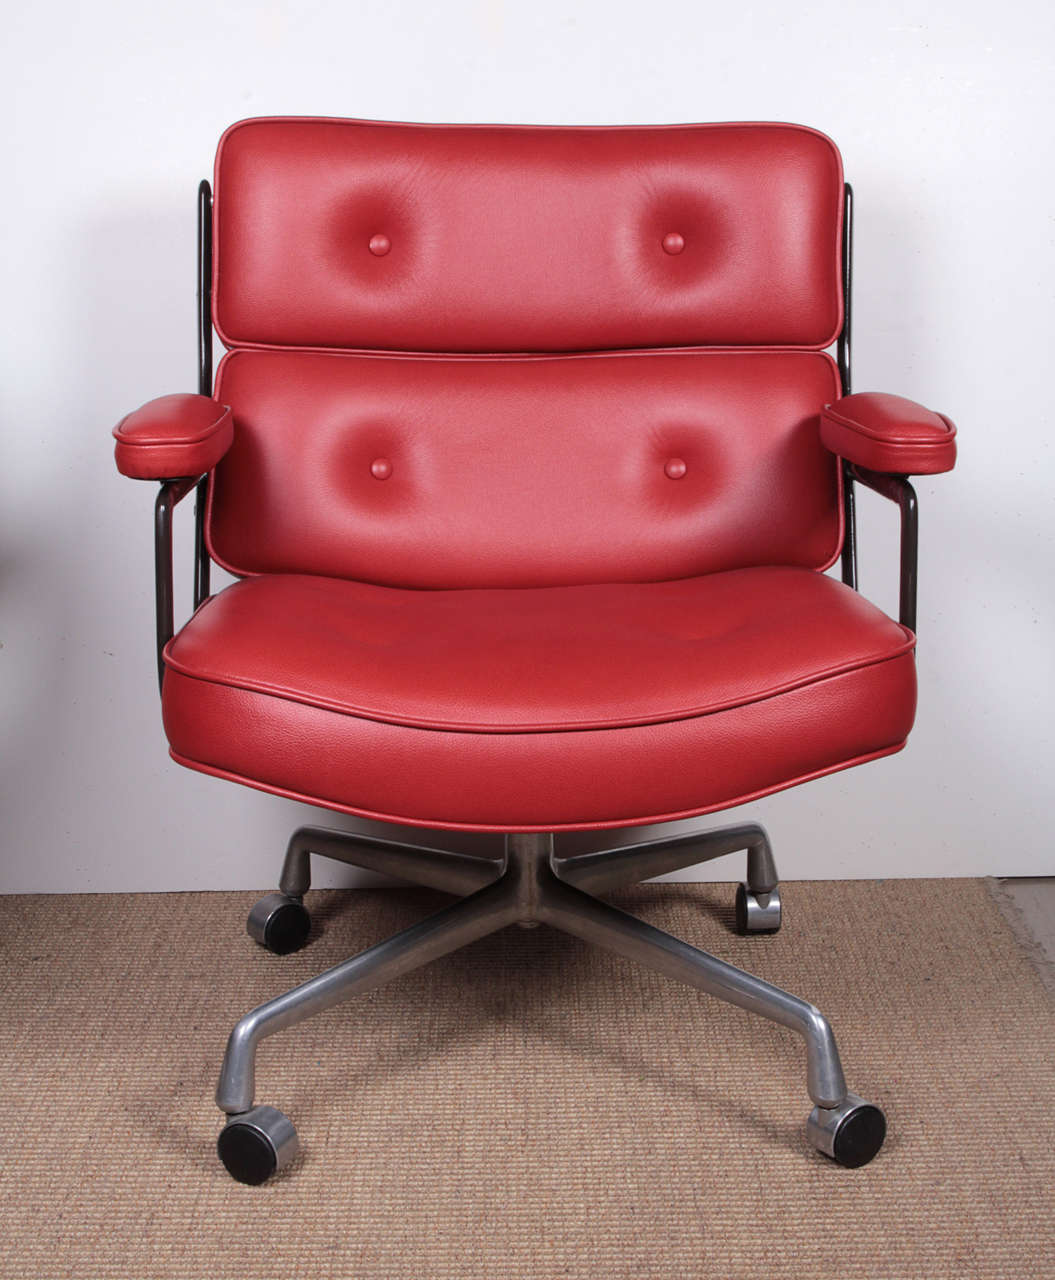 Charles Eames executive desk chair, originally designed for the Time Life building in the 1960′s. This chair has been reupholstered in ox blood colored Spinney beck leather.